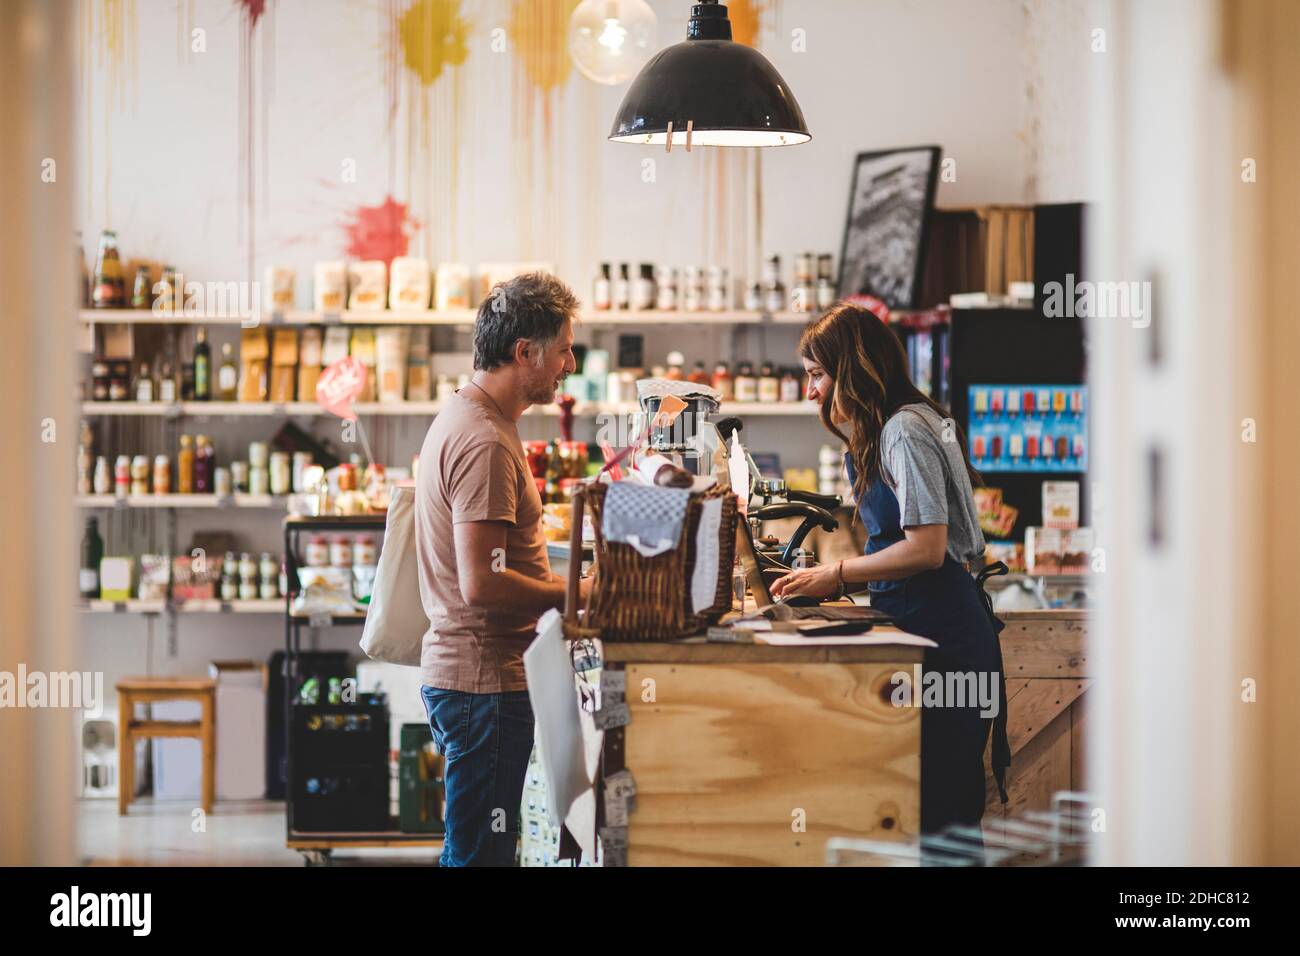 Side view of female sales clerk with customer at checkout counter in deli Stock Photo